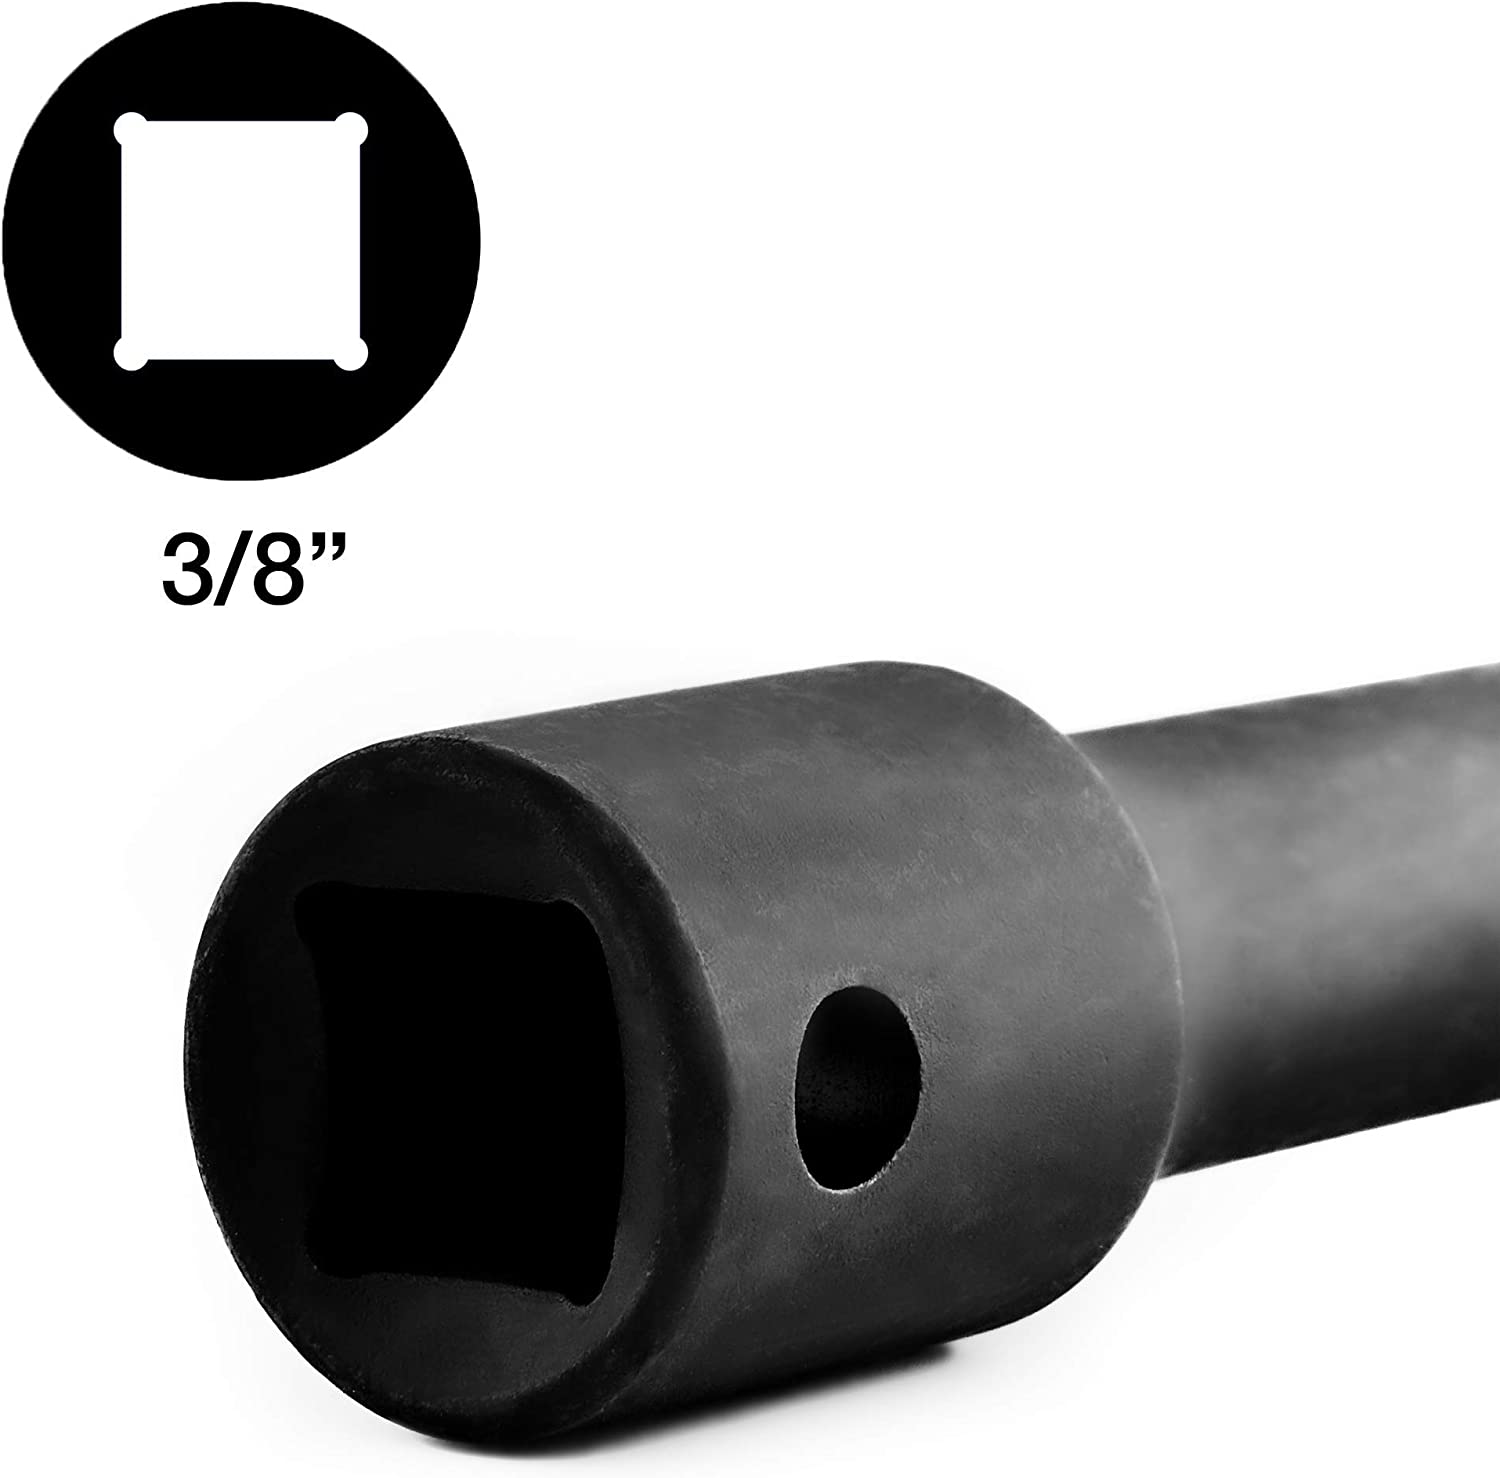 3 pc 3/8" drive Impact Extension Set Sizes: 2",5" and 10" 3